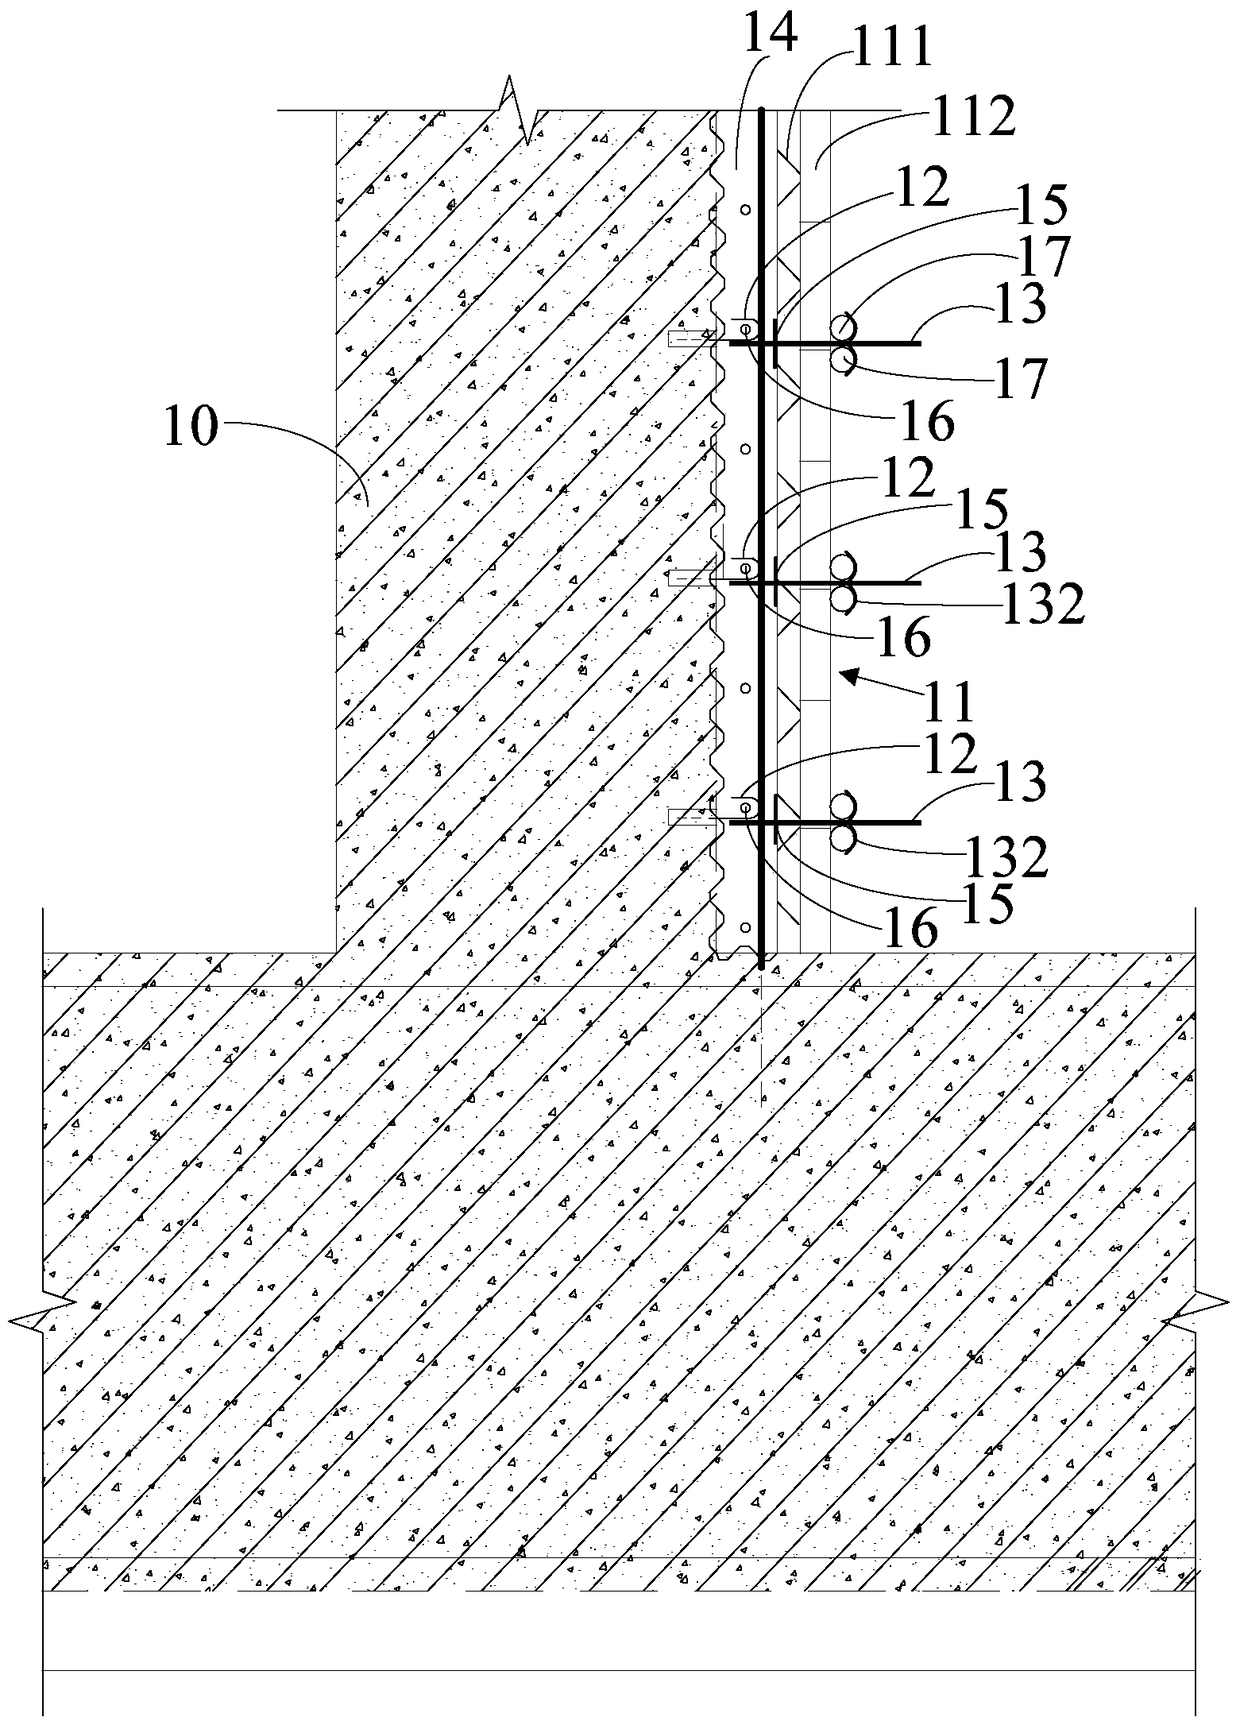 Single-side support formwork structure and construction method for reinforcement construction of enlarged section